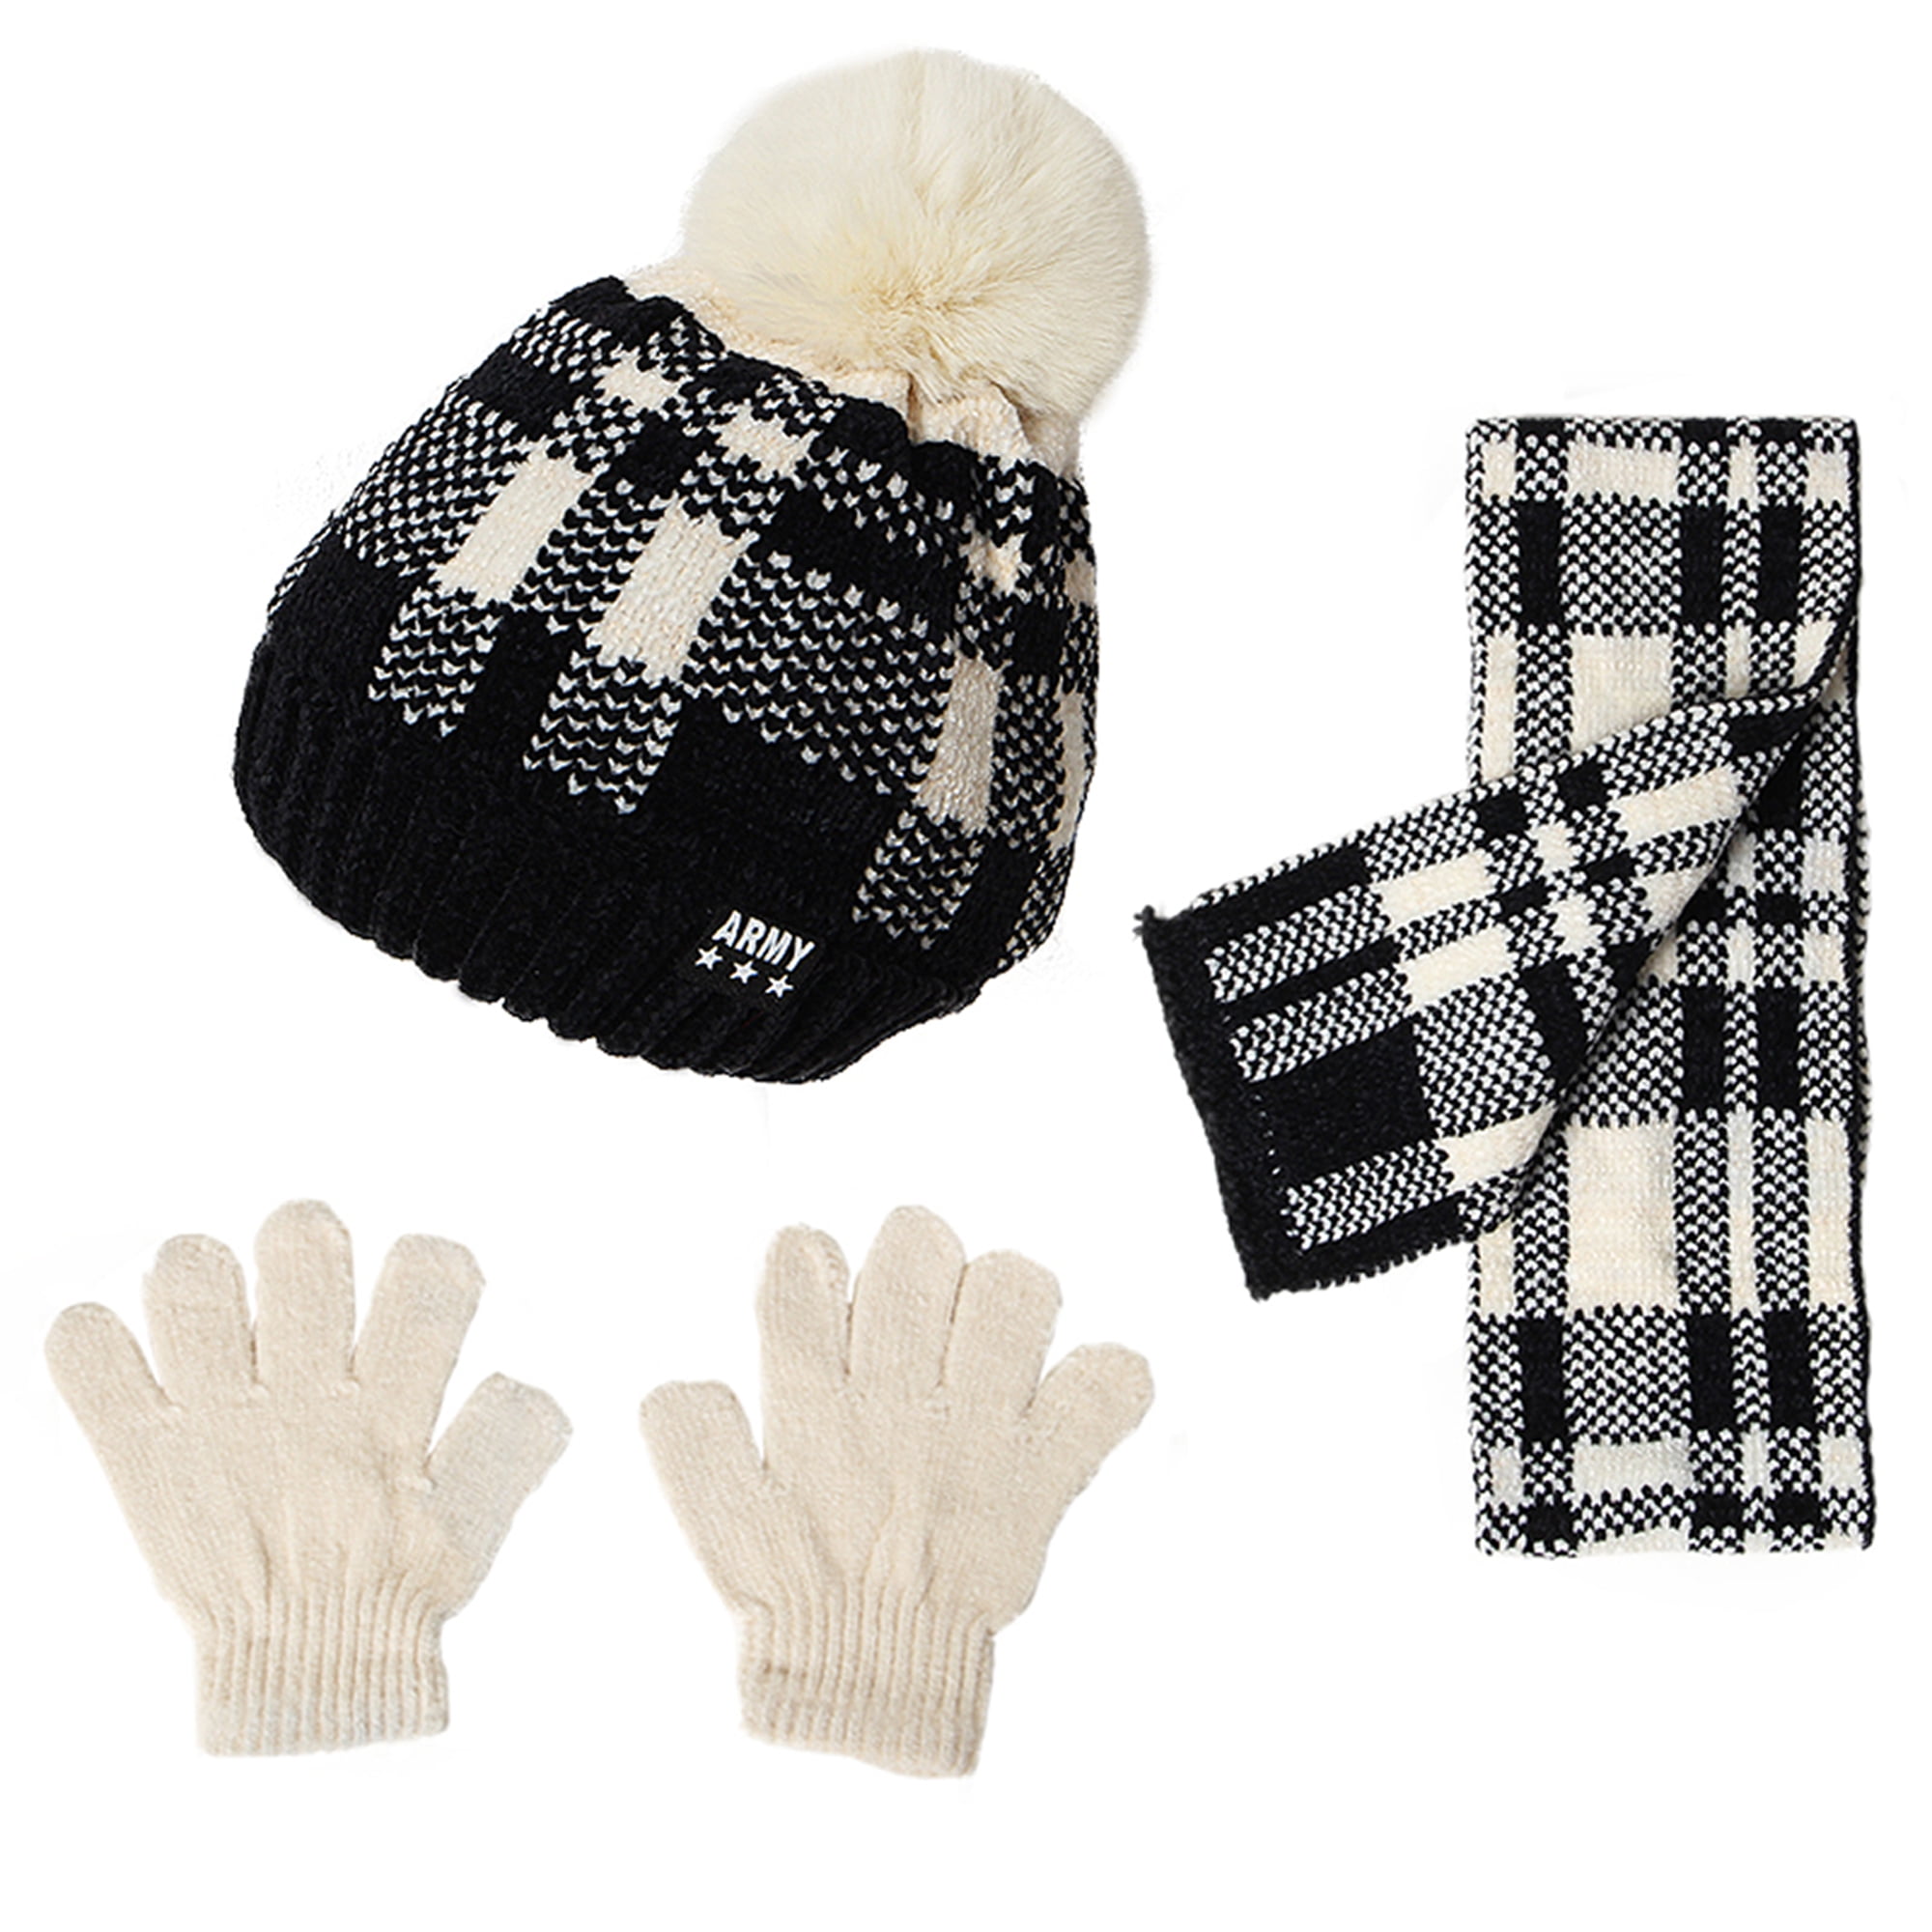 accsa Kids Unisex Winter Warm Girls & Boy Knit Touch Screen Stretchy Magic Gloves 3 Pack Set